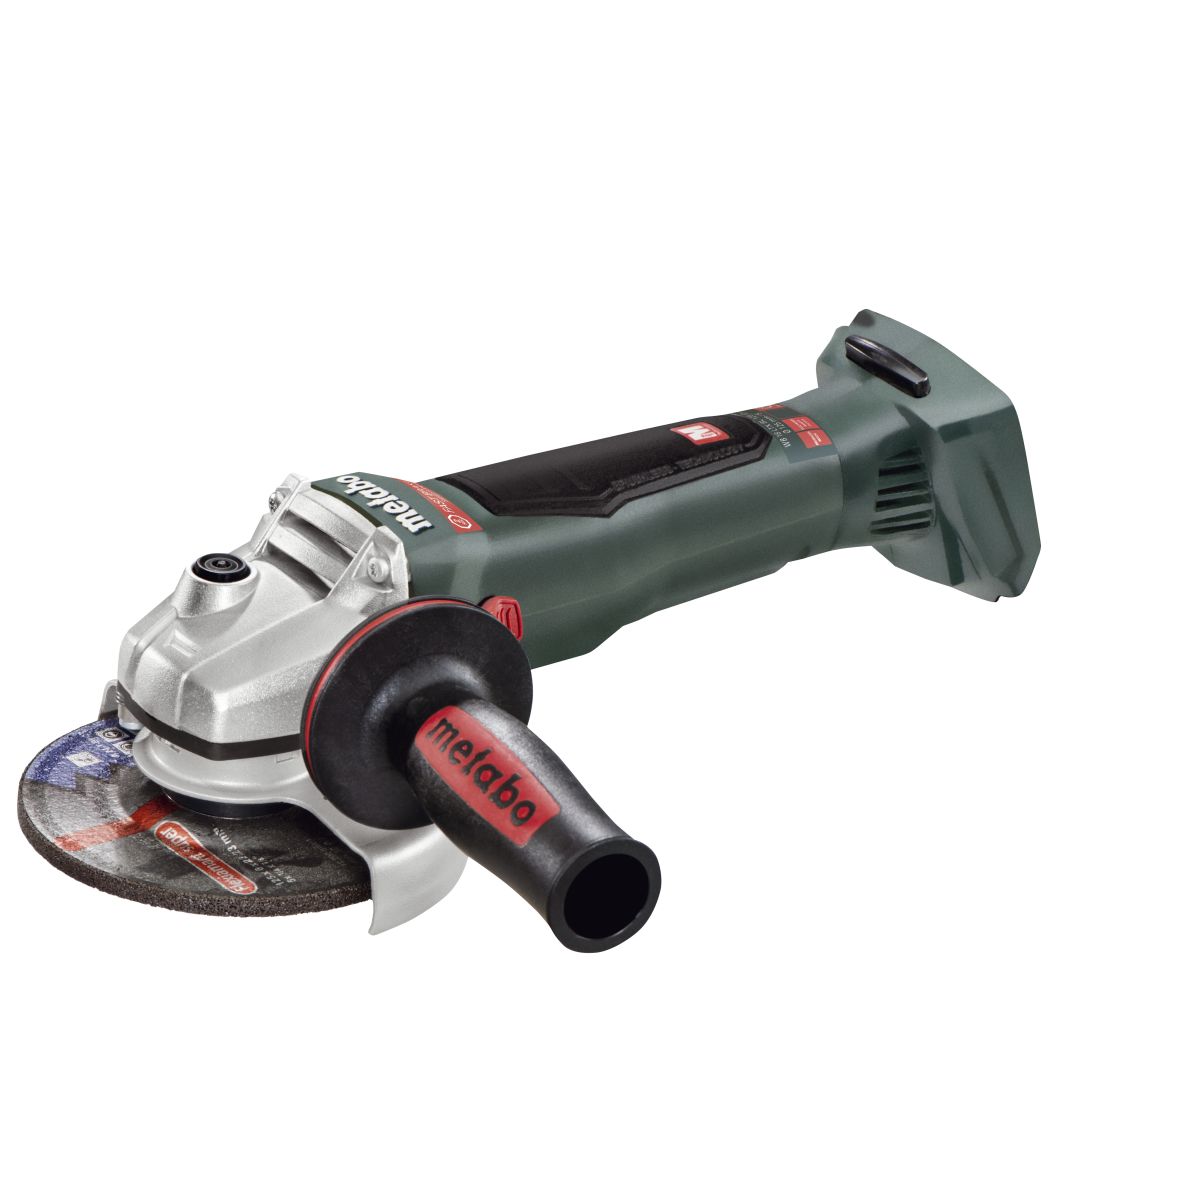 Metabo WB 18 LTX BL 125 Quick 5" Brushless Angle Grinder, Body Only + MetaLoc Case